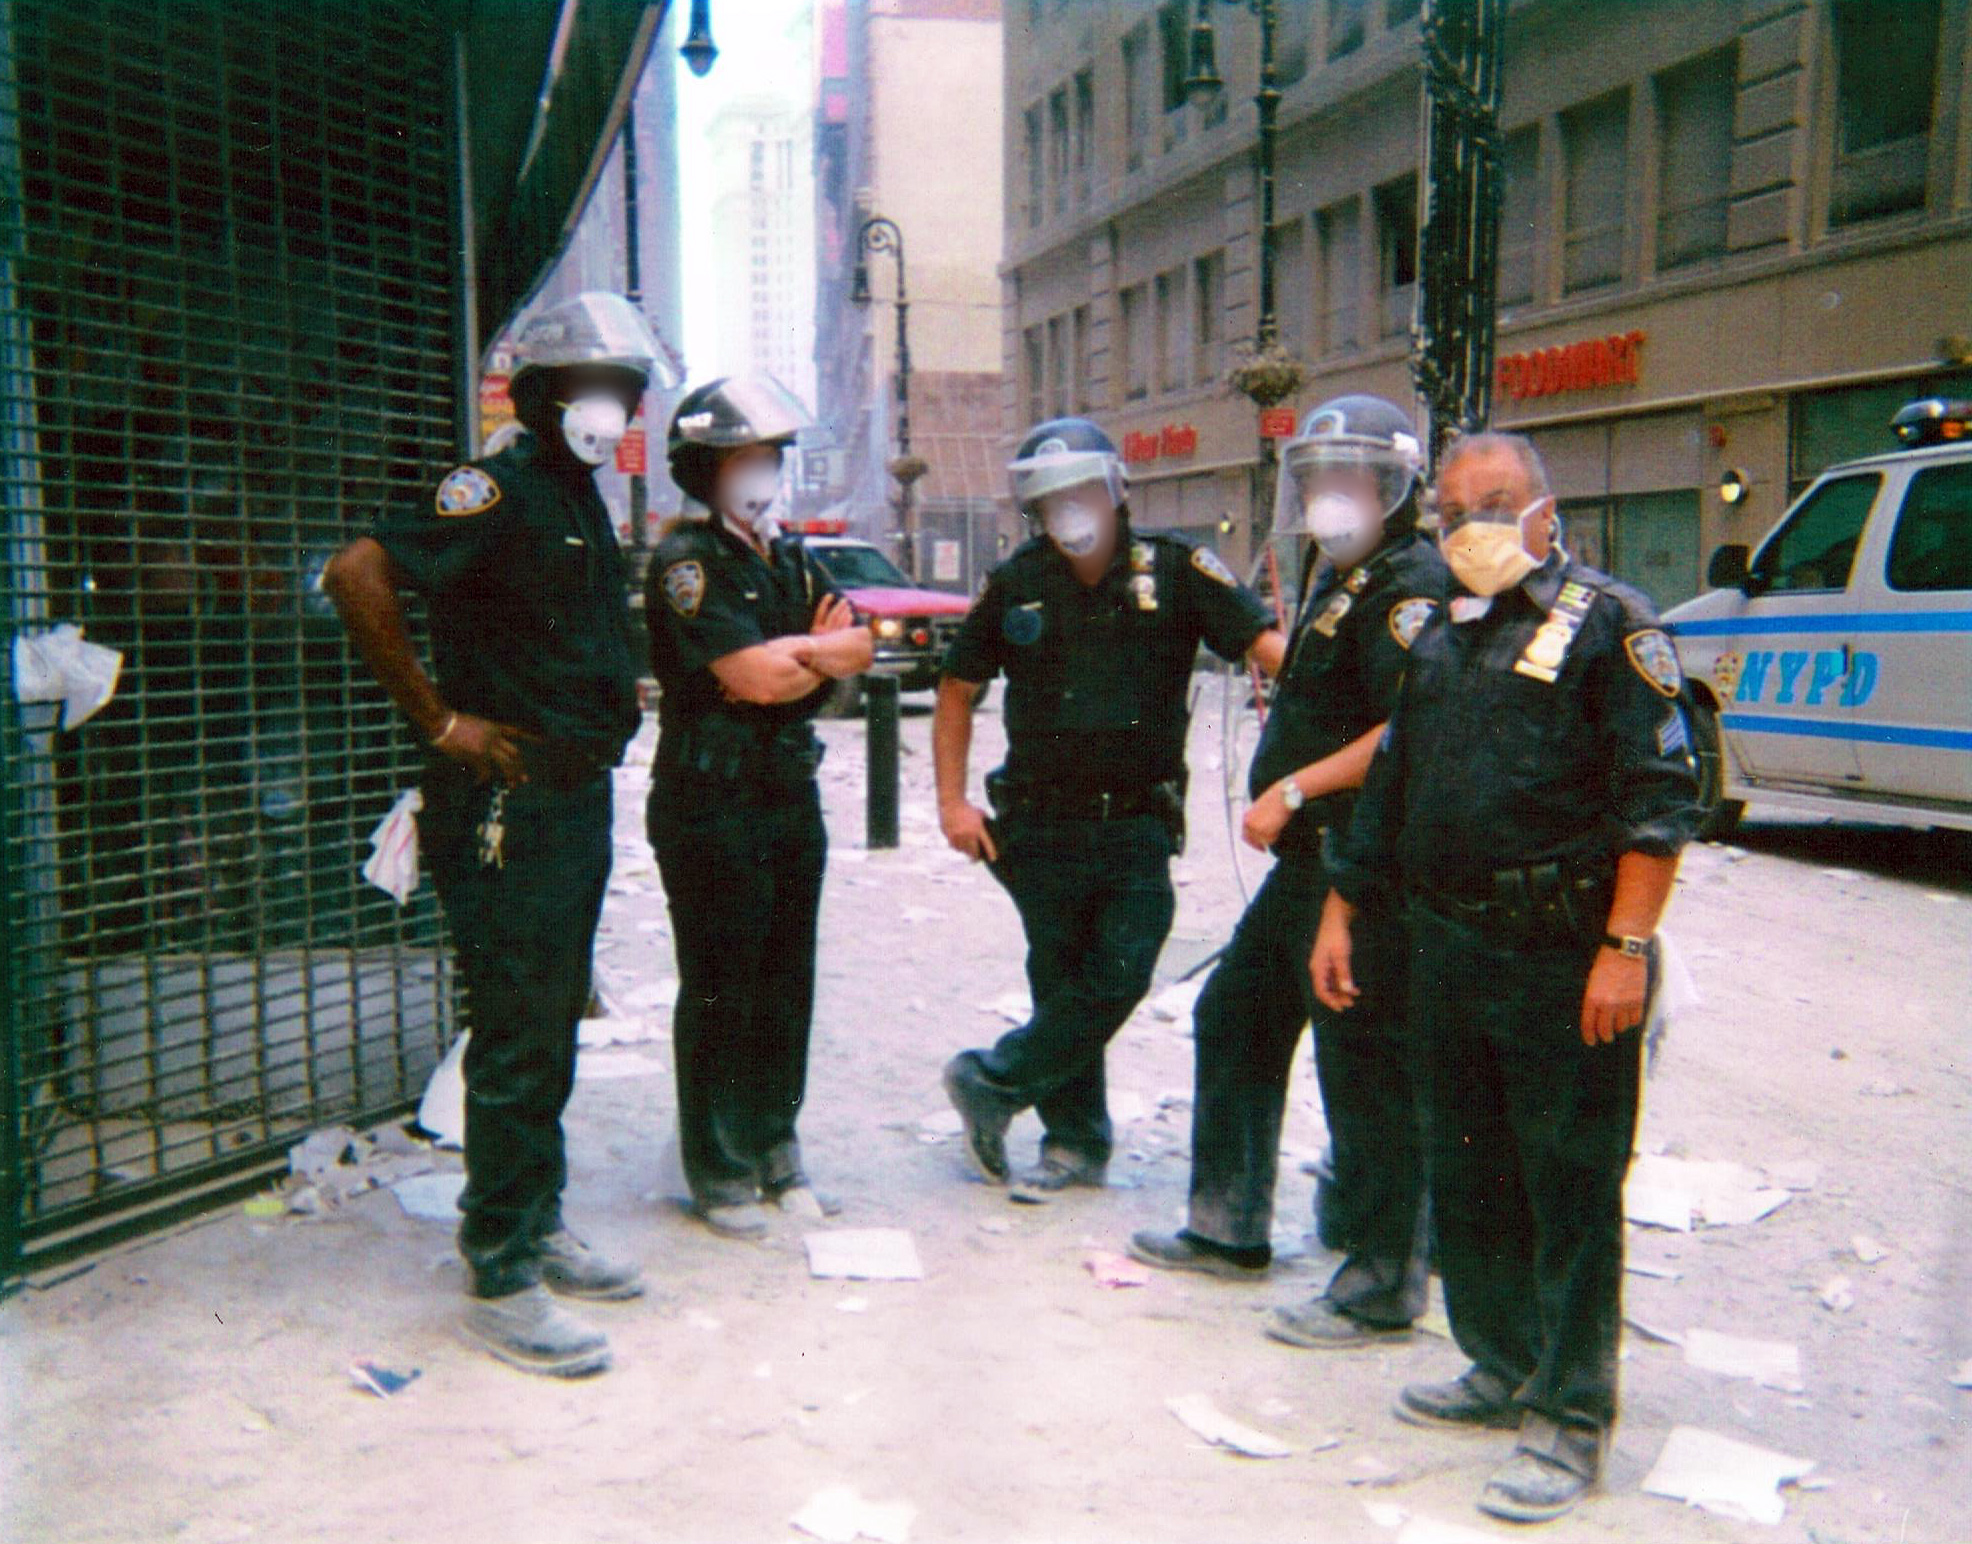 PHOTO: NYPD Sergeant Michael Guedes, far right, stands with a group of officers wearing face masks in Manhattan after the September 11 attack in 2001.